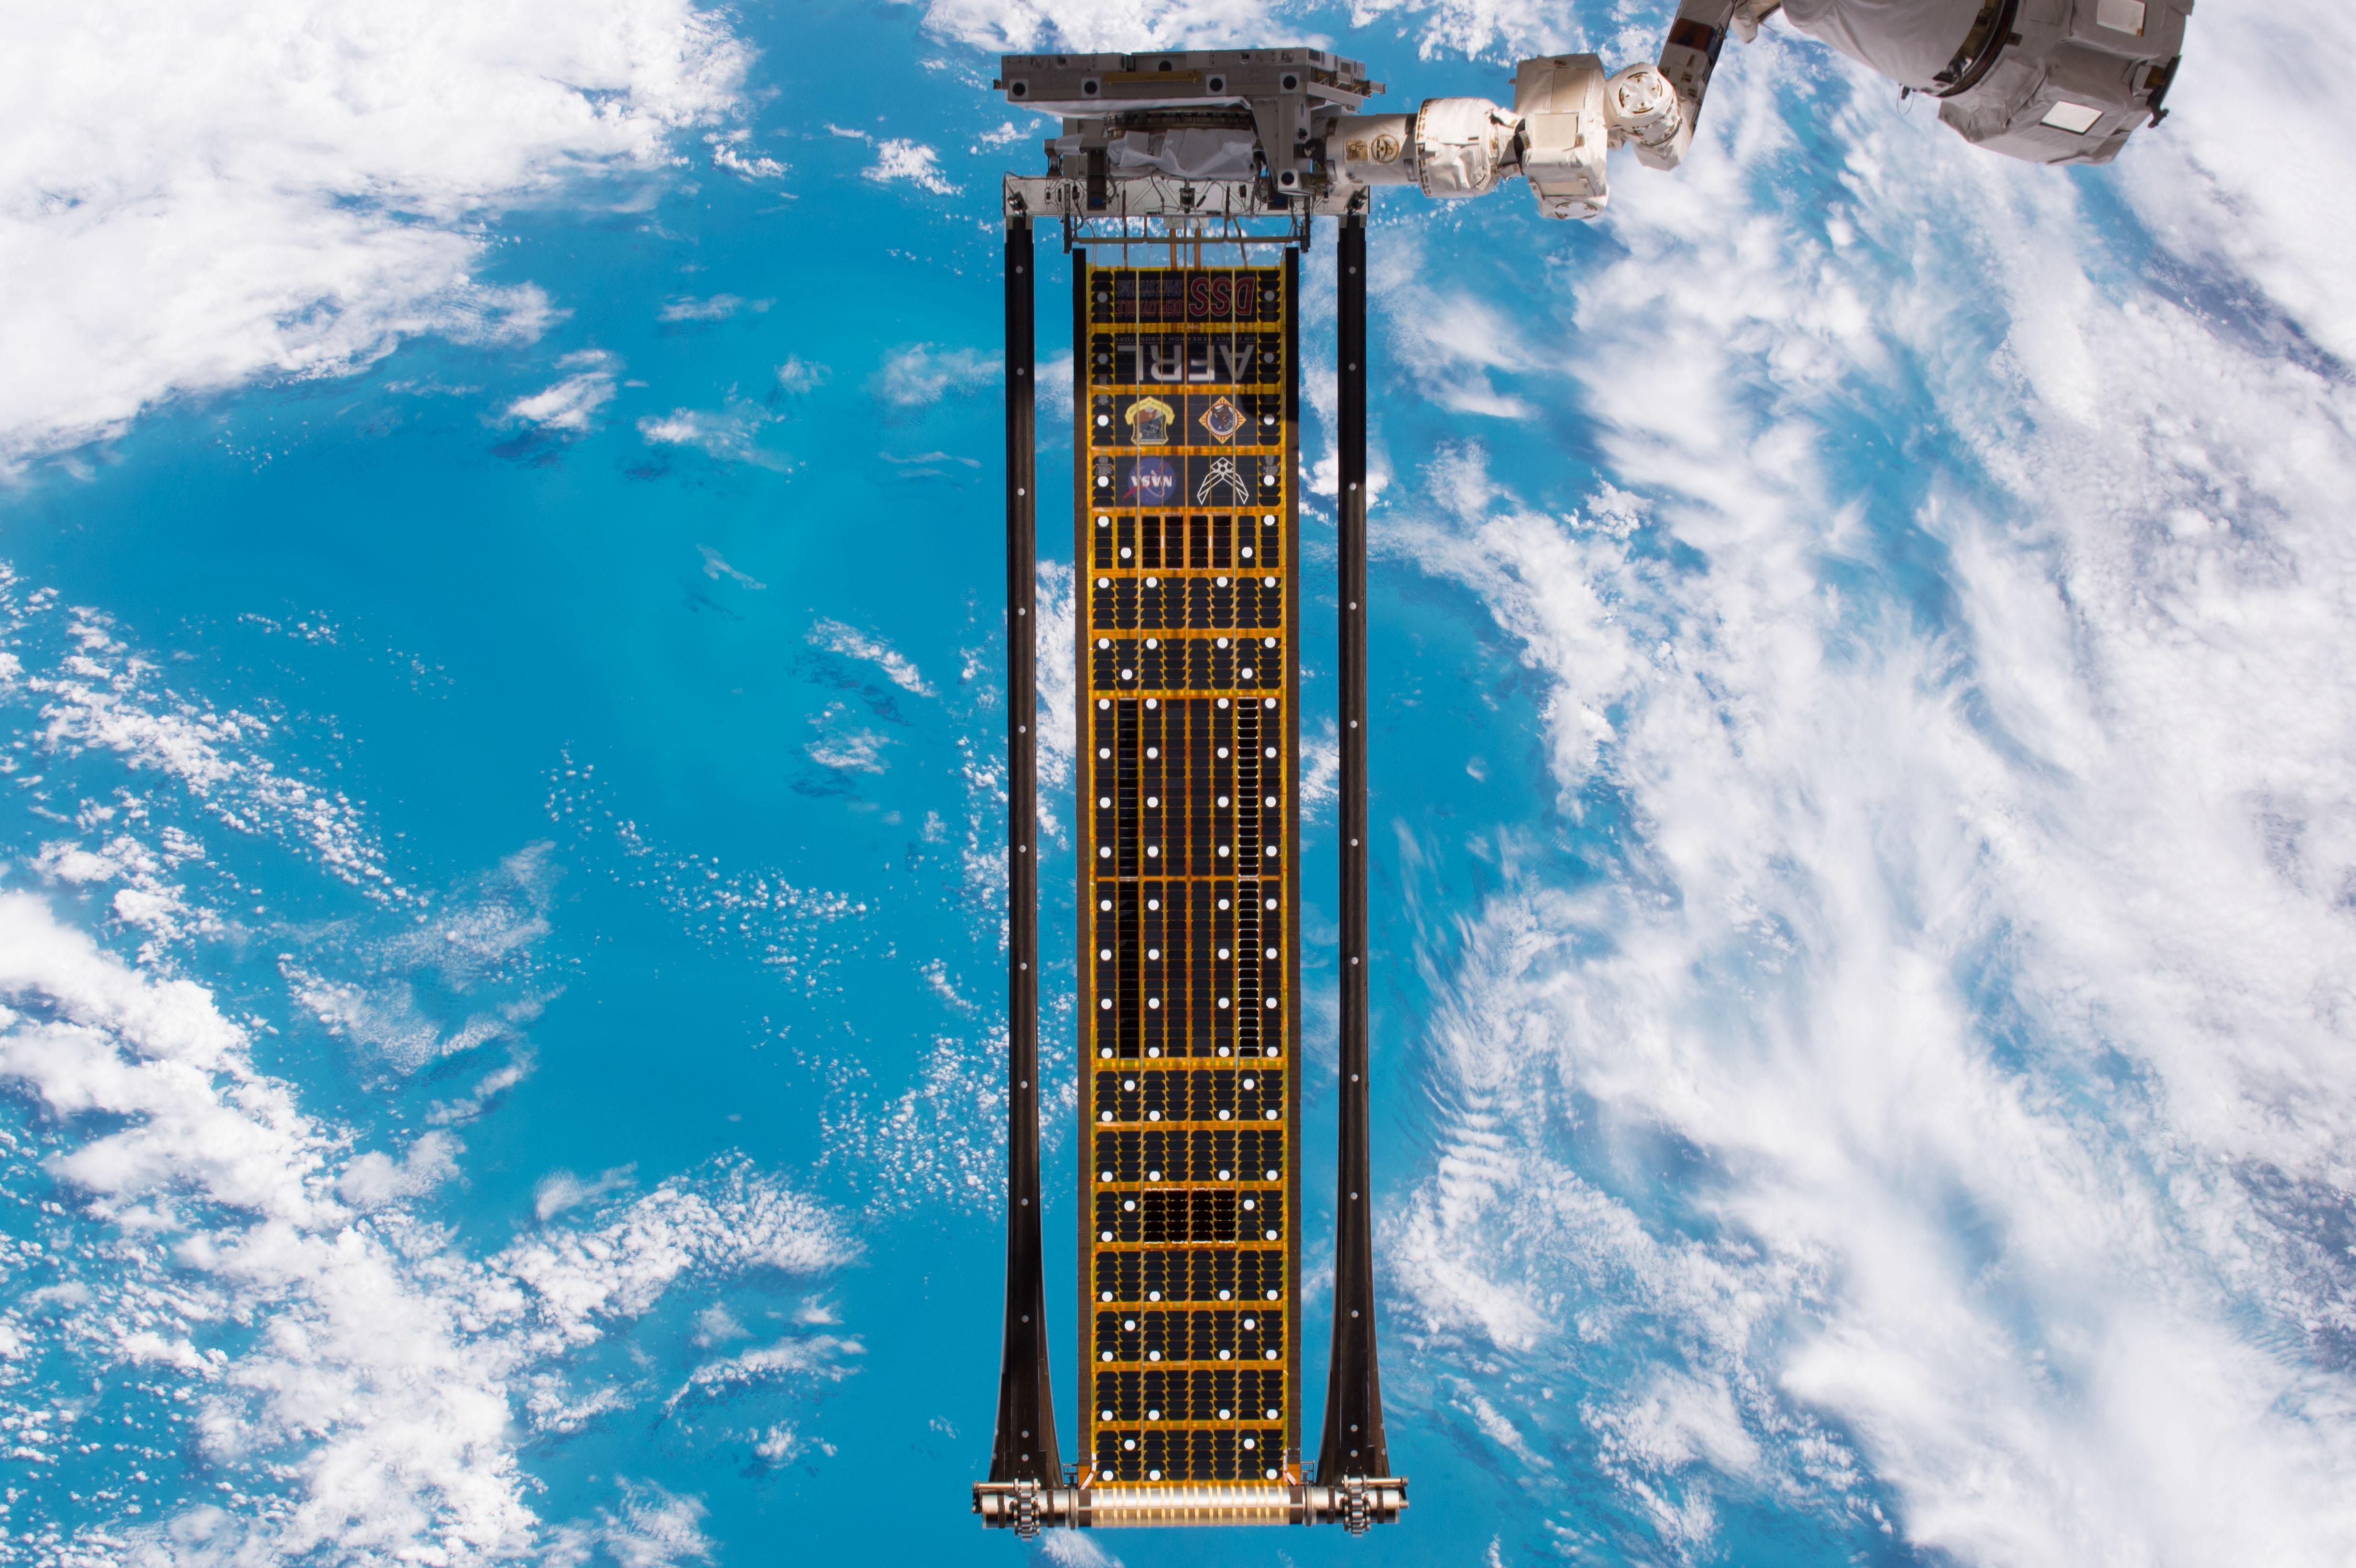 NASA Image: ISS052E002871 - ROSA being tested in ISS